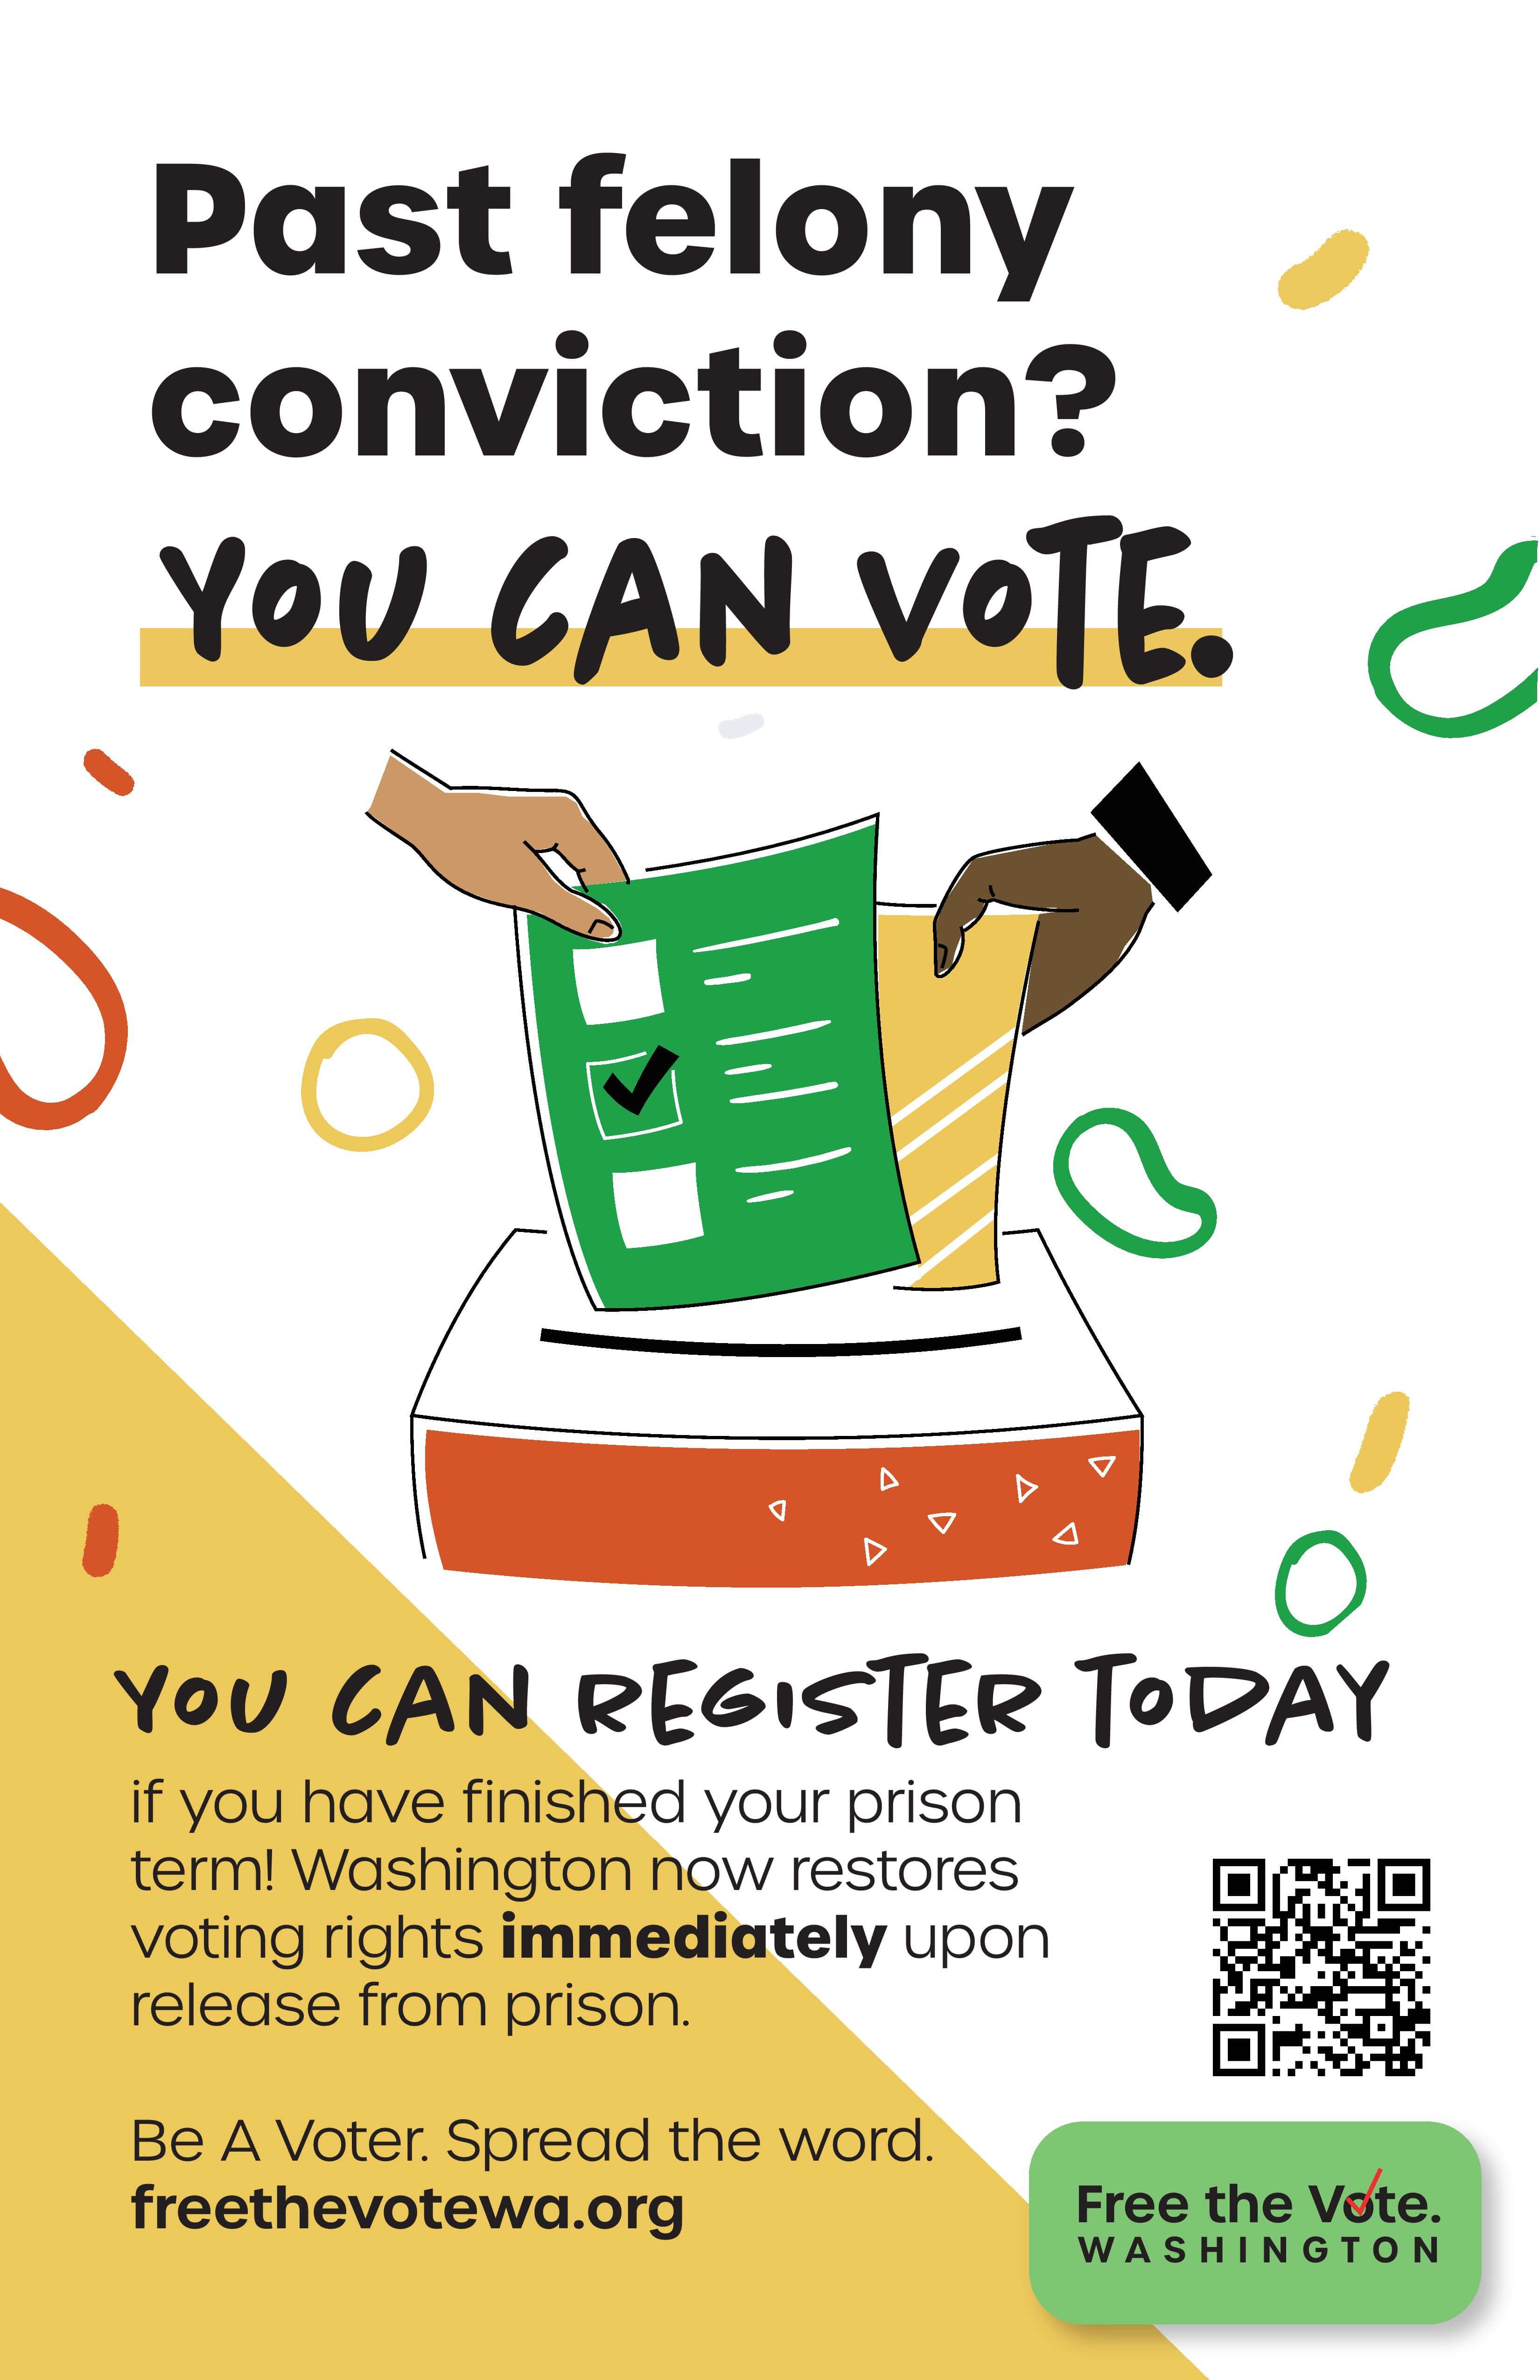 Felony conviction information poster on voting